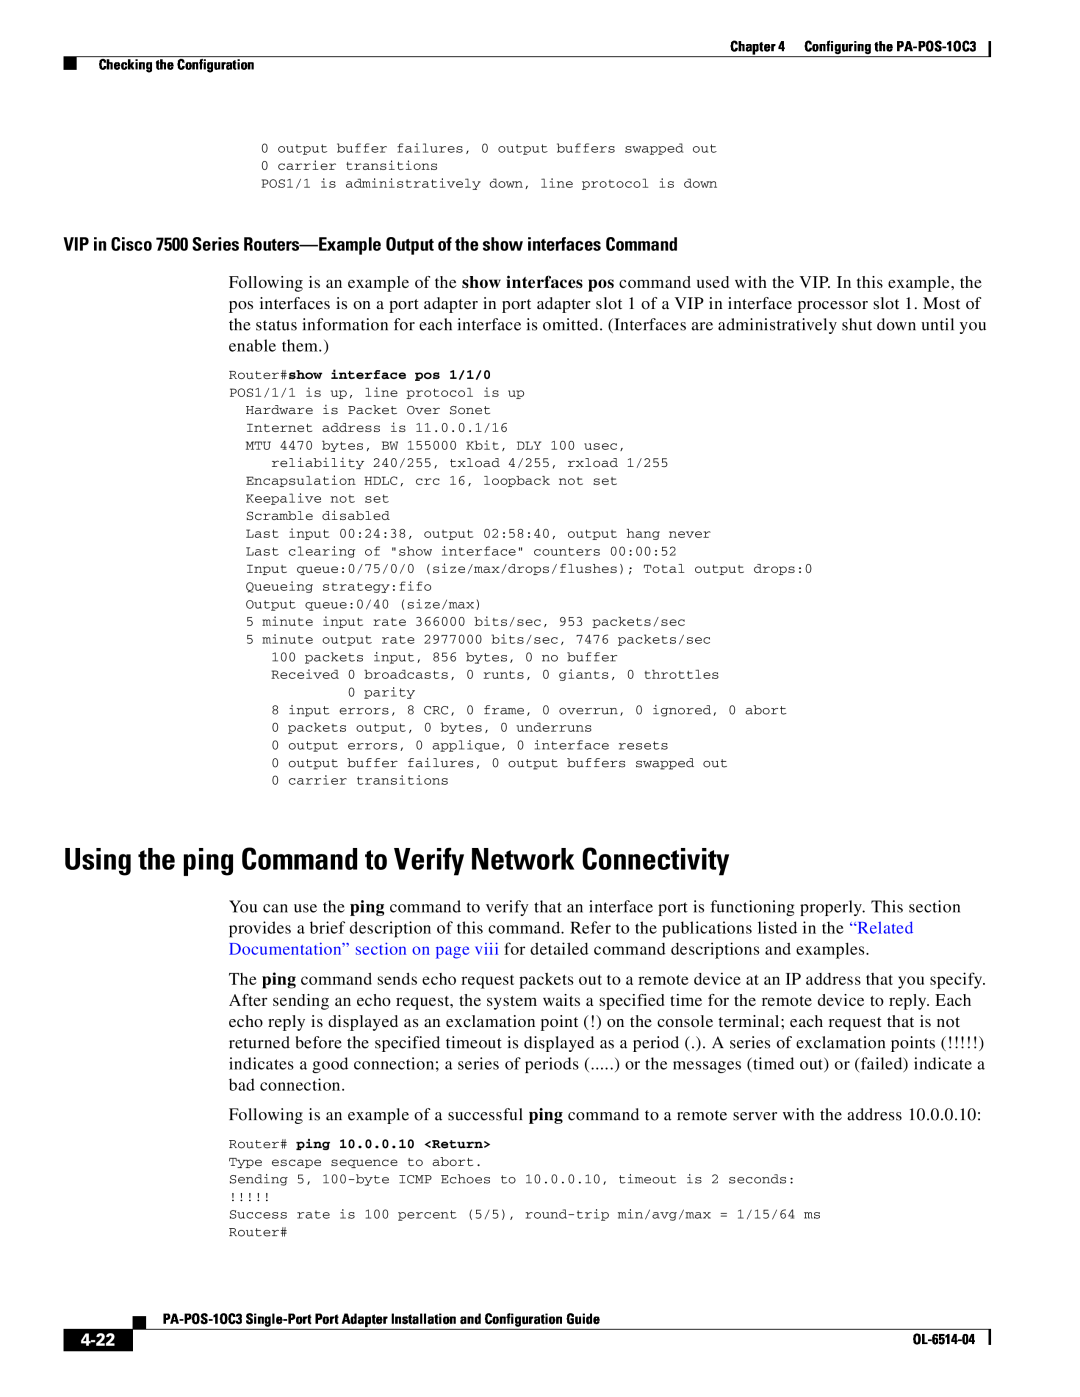 Cisco Systems PA-POS-2OC3, PA-POS-1OC3 manual Using the ping Command to Verify Network Connectivity, 4-22 